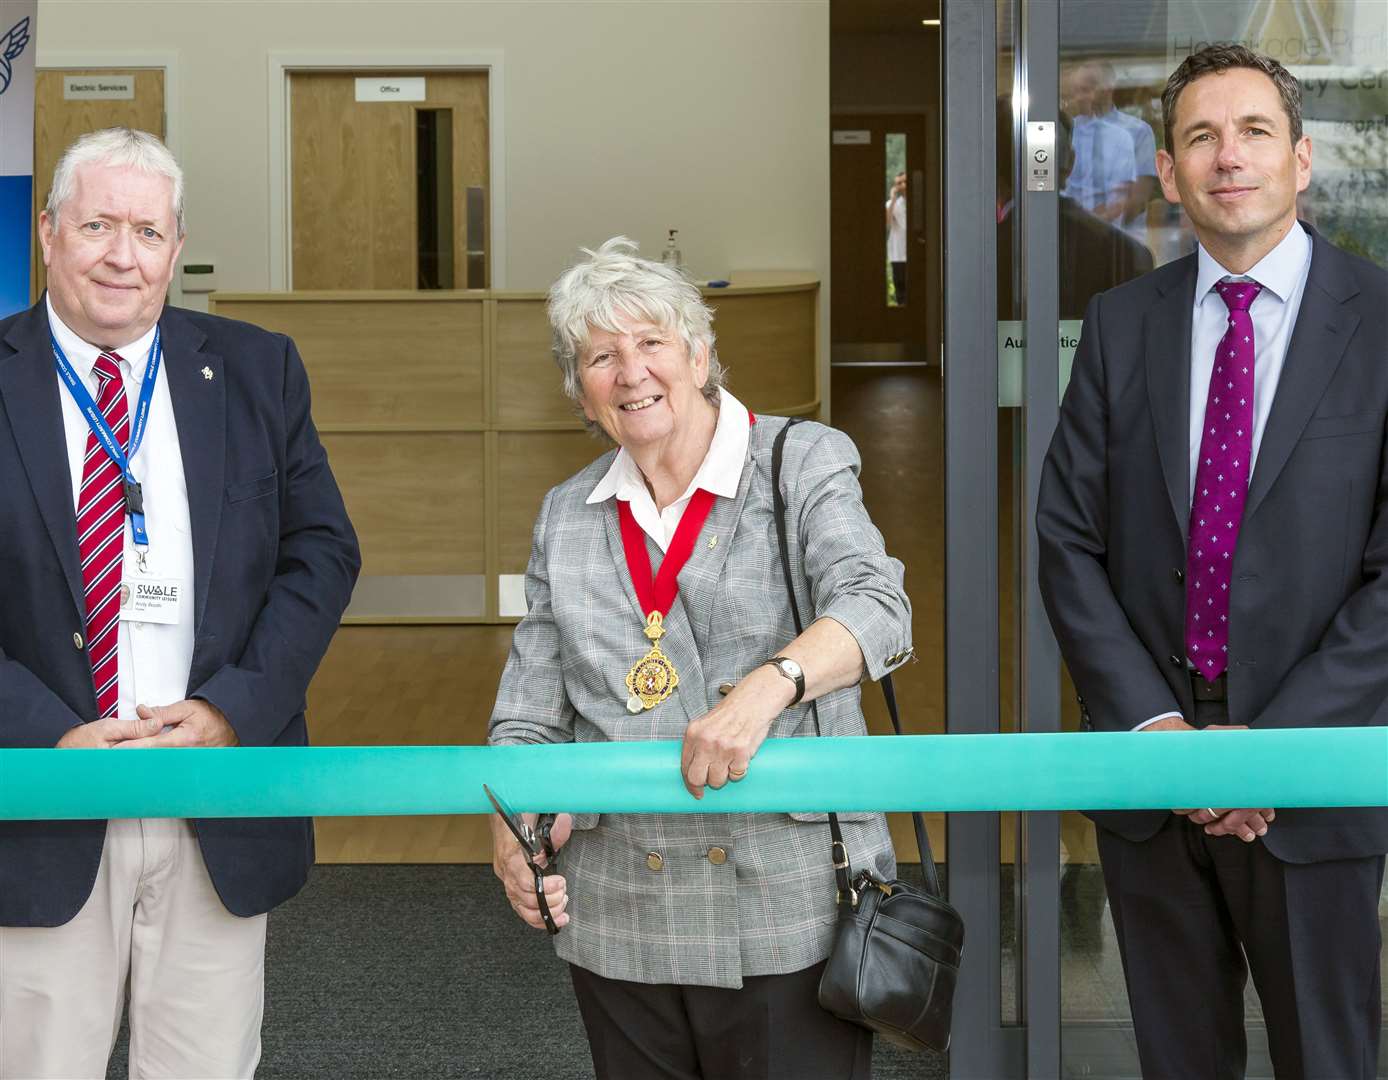 Cllr Ann Allen, the chairman of Kent County Council, cuts the tape to mark the opening of the Hermitage Park Community Centre in Maidstone